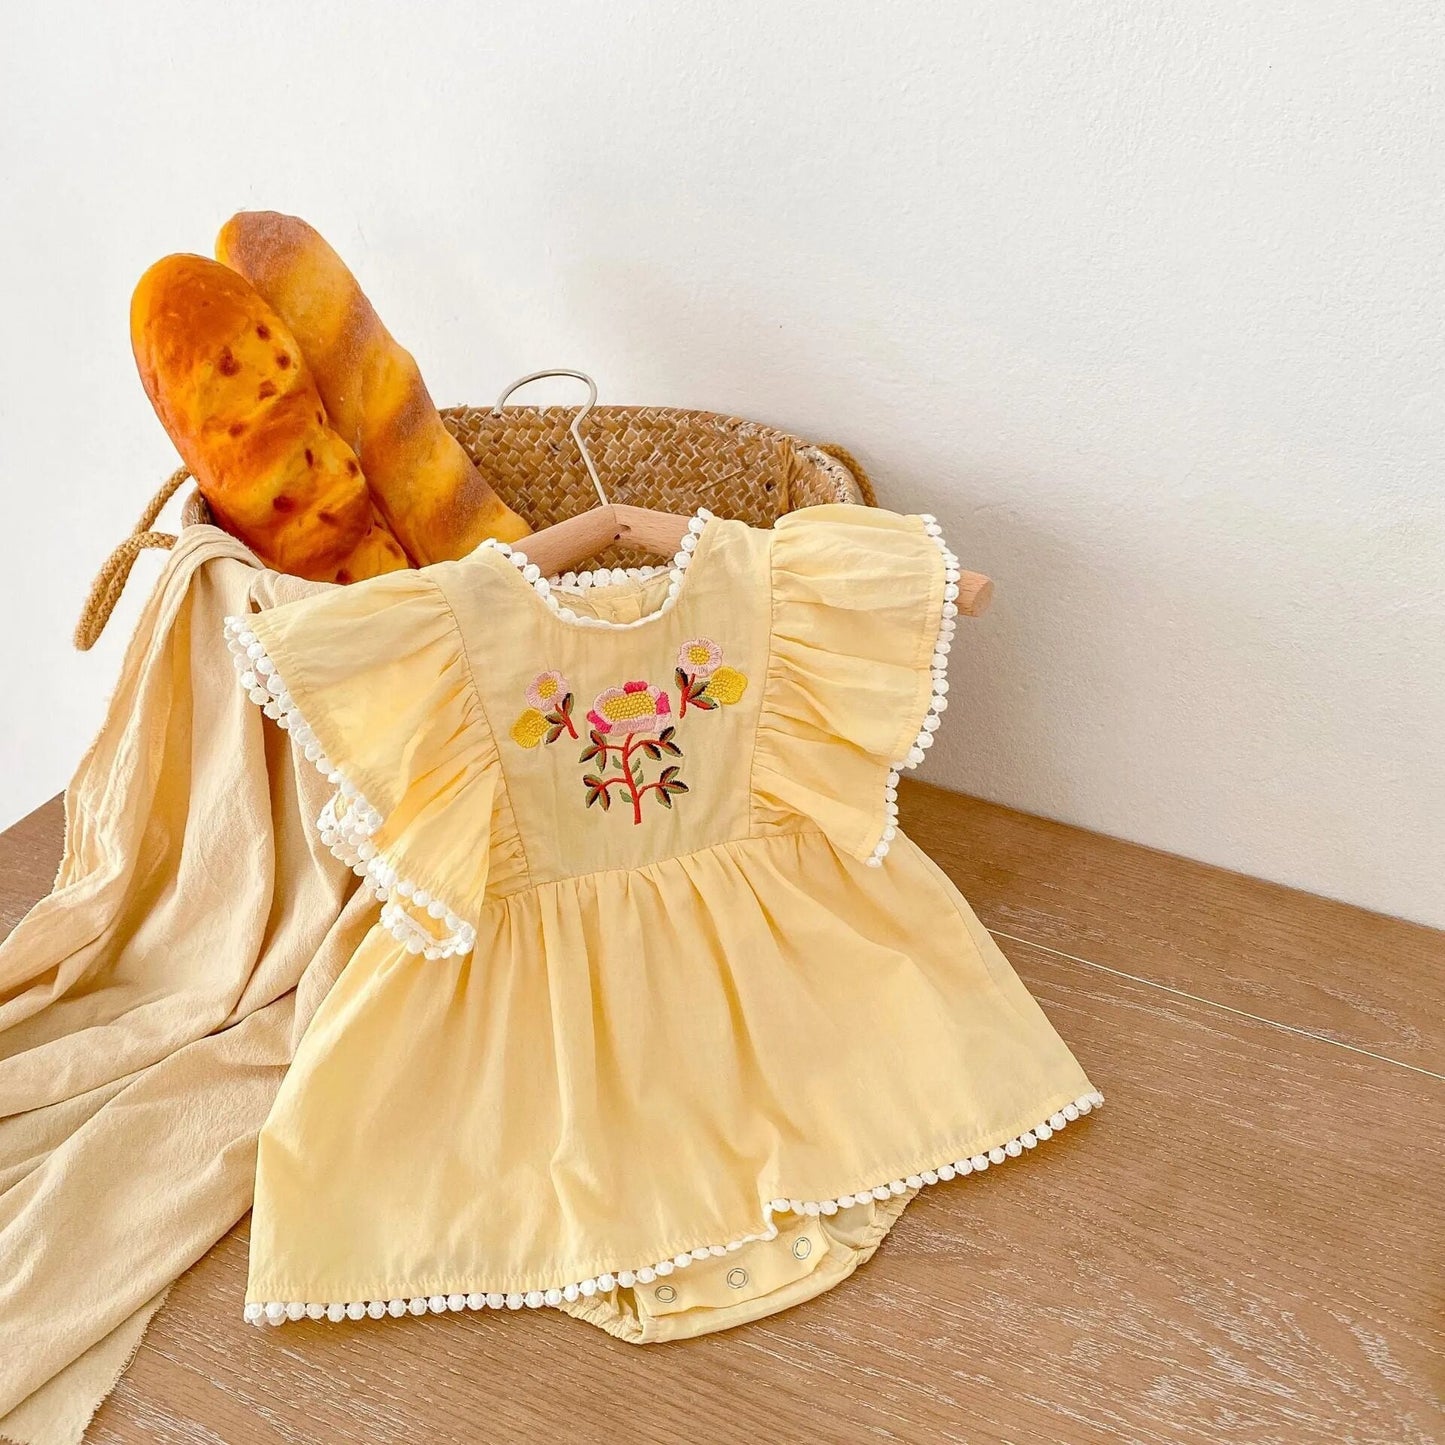 Baby Summer Dress, Embroidered, Flying Sleeve Lace, One-piece Dress for Baby and Toddler